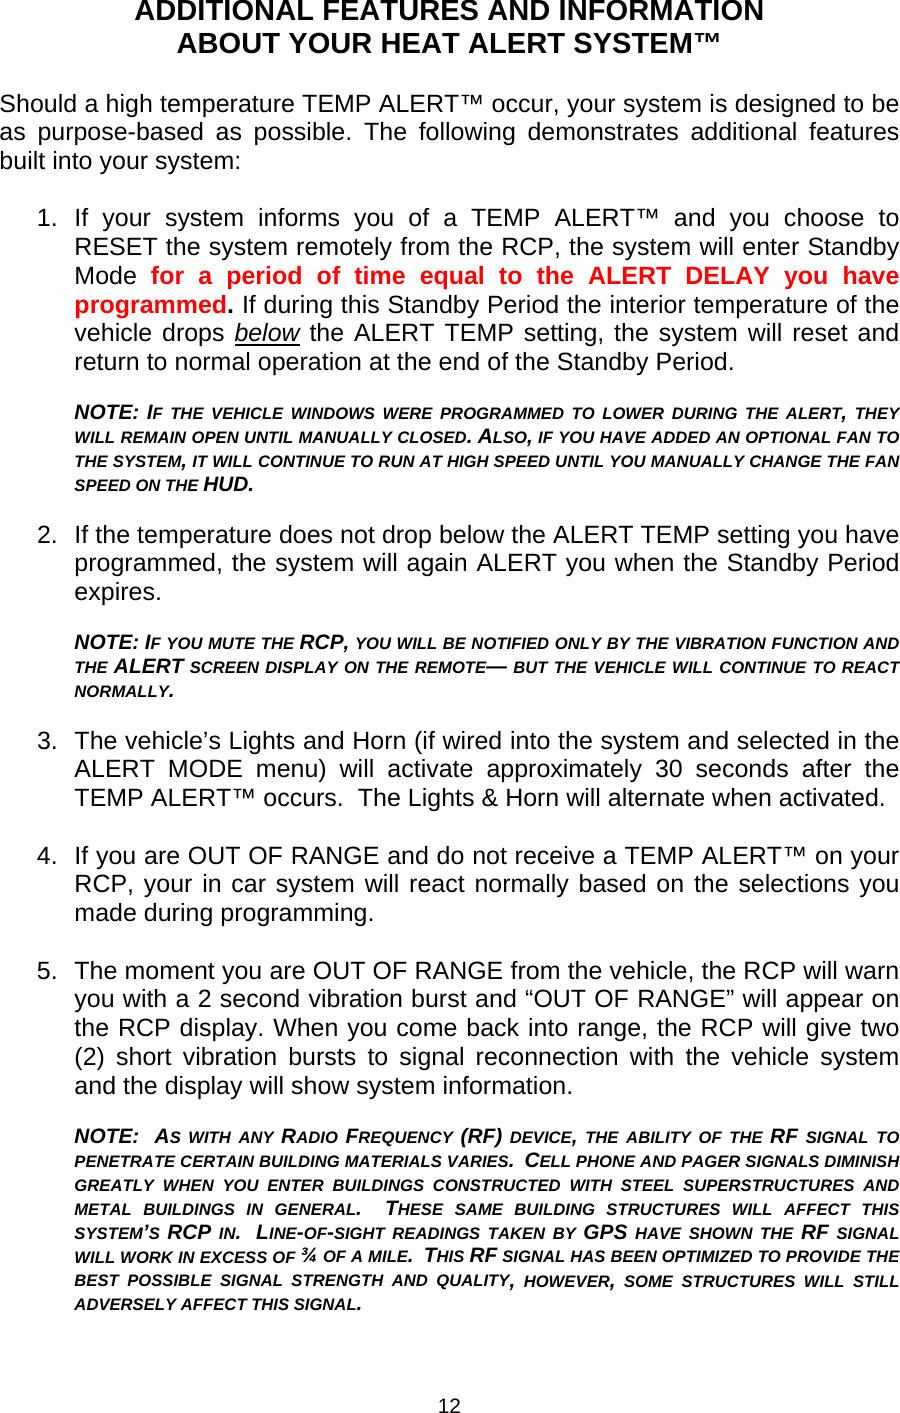 ADDITIONAL FEATURES AND INFORMATION ABOUT YOUR HEAT ALERT SYSTEM™  Should a high temperature TEMP ALERT™ occur, your system is designed to be as purpose-based as possible. The following demonstrates additional features built into your system:  1. If your system informs you of a TEMP ALERT™ and you choose to RESET the system remotely from the RCP, the system will enter Standby Mode  for a period of time equal to the ALERT DELAY you have programmed. If during this Standby Period the interior temperature of the vehicle drops below the ALERT TEMP setting, the system will reset and return to normal operation at the end of the Standby Period.    NOTE: IF THE VEHICLE WINDOWS WERE PROGRAMMED TO LOWER DURING THE ALERT, THEY WILL REMAIN OPEN UNTIL MANUALLY CLOSED. ALSO, IF YOU HAVE ADDED AN OPTIONAL FAN TO THE SYSTEM, IT WILL CONTINUE TO RUN AT HIGH SPEED UNTIL YOU MANUALLY CHANGE THE FAN SPEED ON THE HUD.  2.  If the temperature does not drop below the ALERT TEMP setting you have programmed, the system will again ALERT you when the Standby Period expires.  NOTE: IF YOU MUTE THE RCP, YOU WILL BE NOTIFIED ONLY BY THE VIBRATION FUNCTION AND THE ALERT SCREEN DISPLAY ON THE REMOTE— BUT THE VEHICLE WILL CONTINUE TO REACT NORMALLY.  3.  The vehicle’s Lights and Horn (if wired into the system and selected in the ALERT MODE menu) will activate approximately 30 seconds after the TEMP ALERT™ occurs.  The Lights &amp; Horn will alternate when activated.  4.  If you are OUT OF RANGE and do not receive a TEMP ALERT™ on your RCP, your in car system will react normally based on the selections you made during programming.  5.  The moment you are OUT OF RANGE from the vehicle, the RCP will warn you with a 2 second vibration burst and “OUT OF RANGE” will appear on the RCP display. When you come back into range, the RCP will give two (2) short vibration bursts to signal reconnection with the vehicle system and the display will show system information.   NOTE:  AS WITH ANY RADIO FREQUENCY (RF) DEVICE, THE ABILITY OF THE RF SIGNAL TO PENETRATE CERTAIN BUILDING MATERIALS VARIES.  CELL PHONE AND PAGER SIGNALS DIMINISH GREATLY WHEN YOU ENTER BUILDINGS CONSTRUCTED WITH STEEL SUPERSTRUCTURES AND METAL BUILDINGS IN GENERAL.  THESE SAME BUILDING STRUCTURES WILL AFFECT THIS SYSTEM’S RCP IN.  LINE-OF-SIGHT READINGS TAKEN BY GPS HAVE SHOWN THE RF SIGNAL WILL WORK IN EXCESS OF ¾ OF A MILE.  THIS RF SIGNAL HAS BEEN OPTIMIZED TO PROVIDE THE BEST POSSIBLE SIGNAL STRENGTH AND QUALITY, HOWEVER, SOME STRUCTURES WILL STILL ADVERSELY AFFECT THIS SIGNAL.  12 